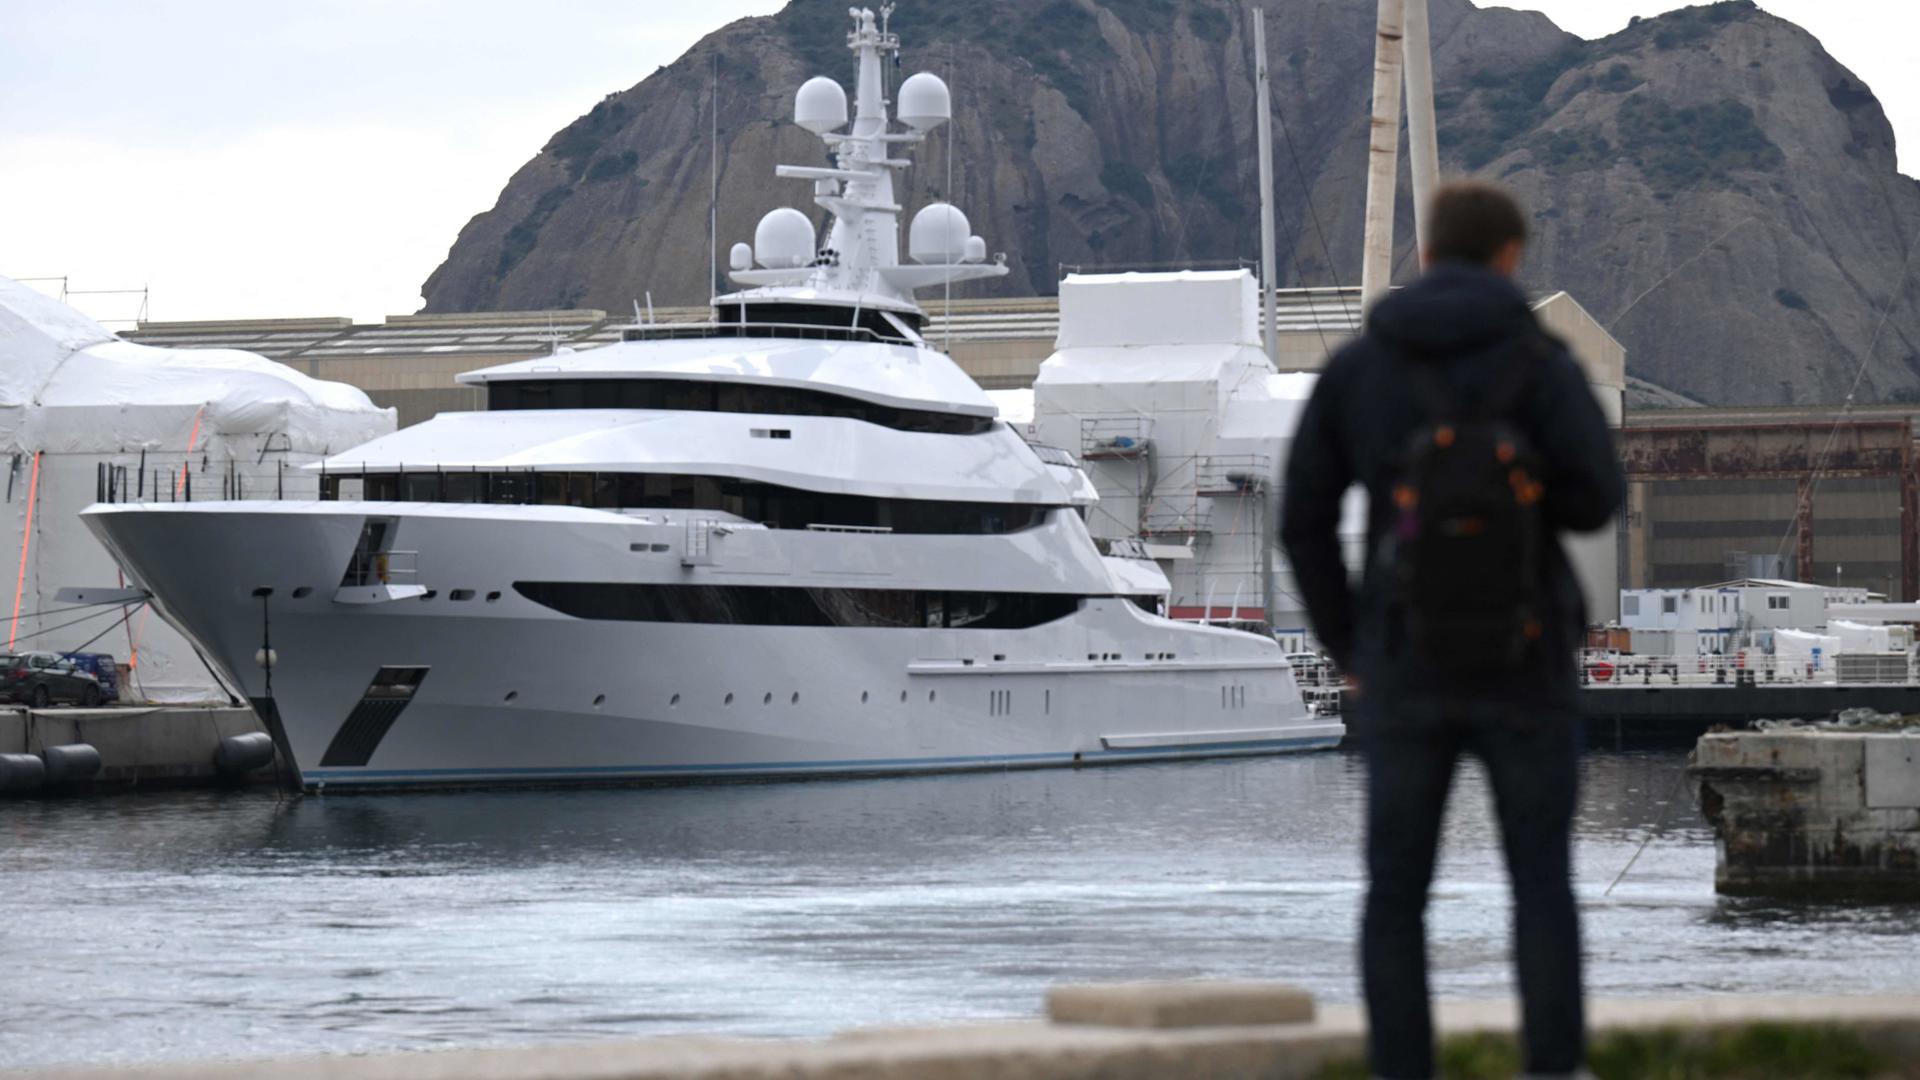 A super yacht, Amore Vero, owned by a company linked to Igor Sechin, chief executive of Russian energy giant Rosneft, moored at a shipyard of La Ciotat, near Marseille, southern France last year